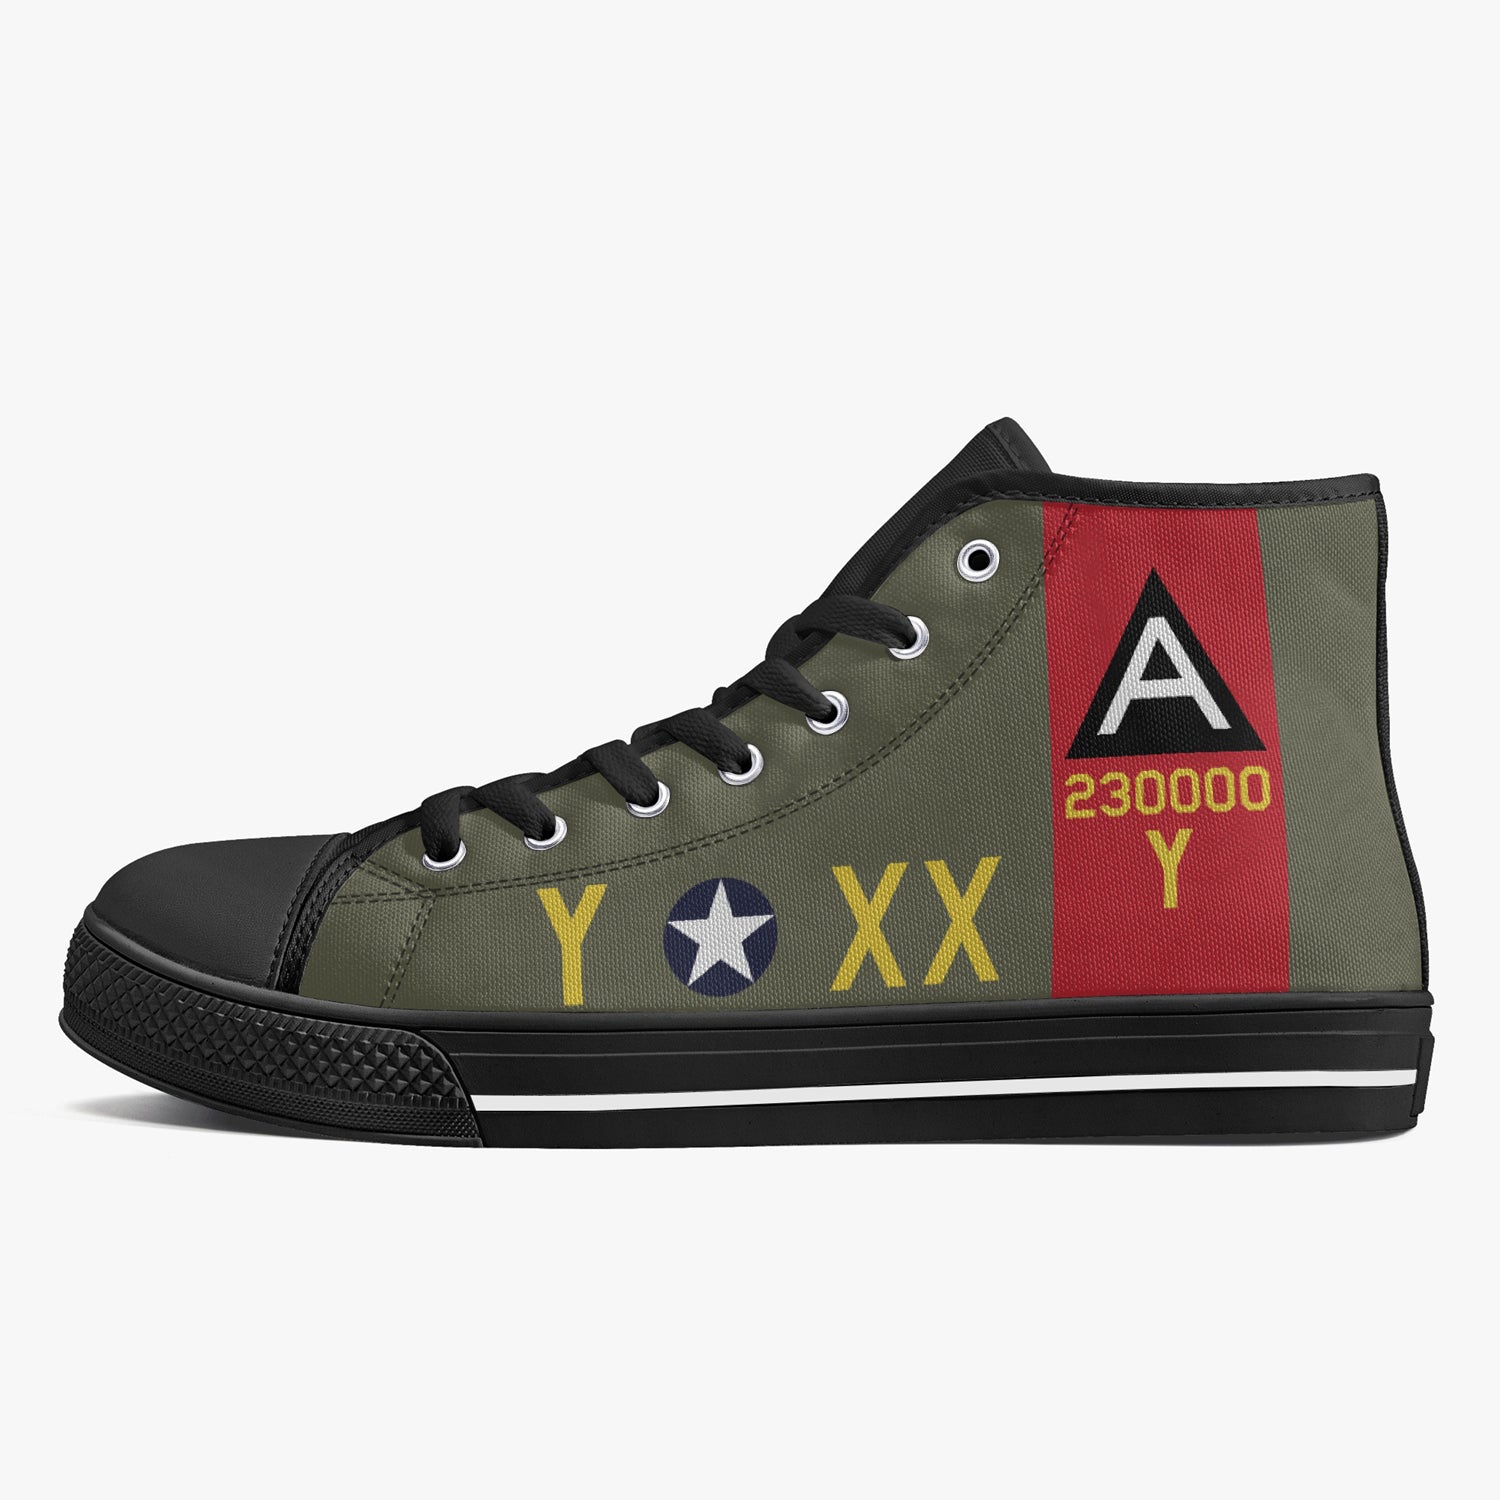 91st Bomb Group High Top Canvas Shoe Customisation Request - I Love a Hangar